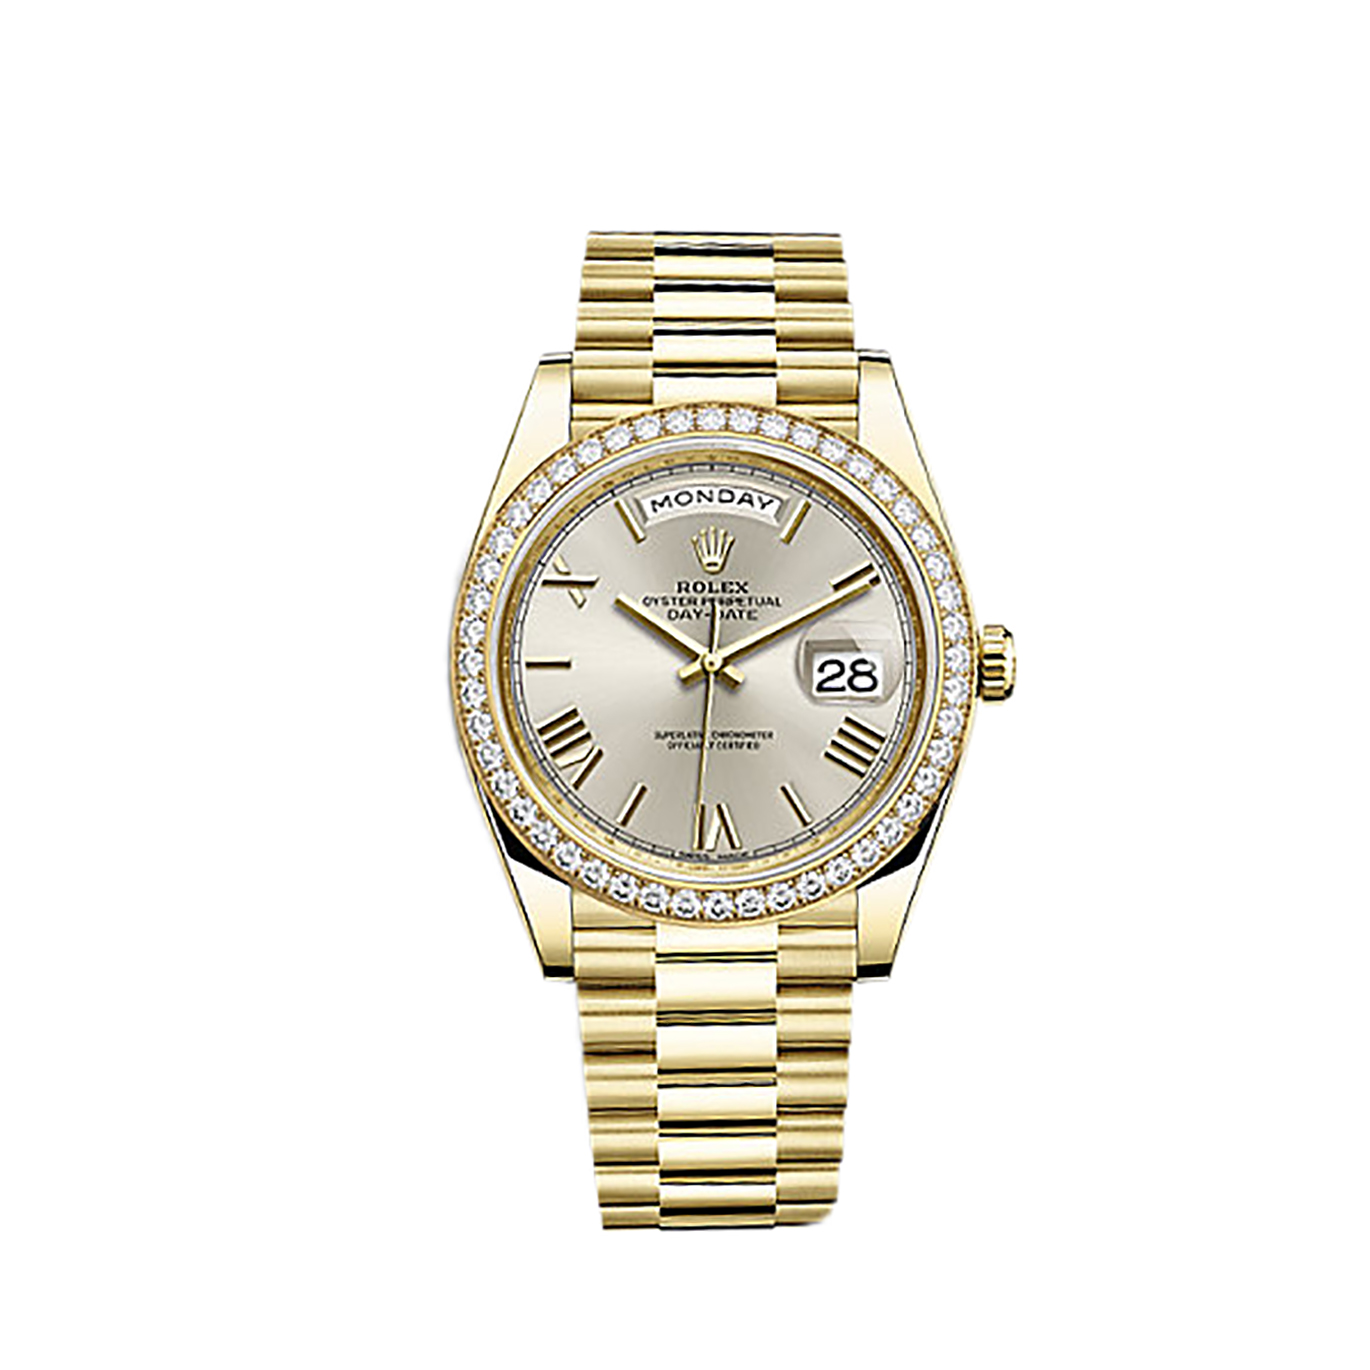 Day-Date 40 228348RBR Gold & Diamonds Watch (Silver)